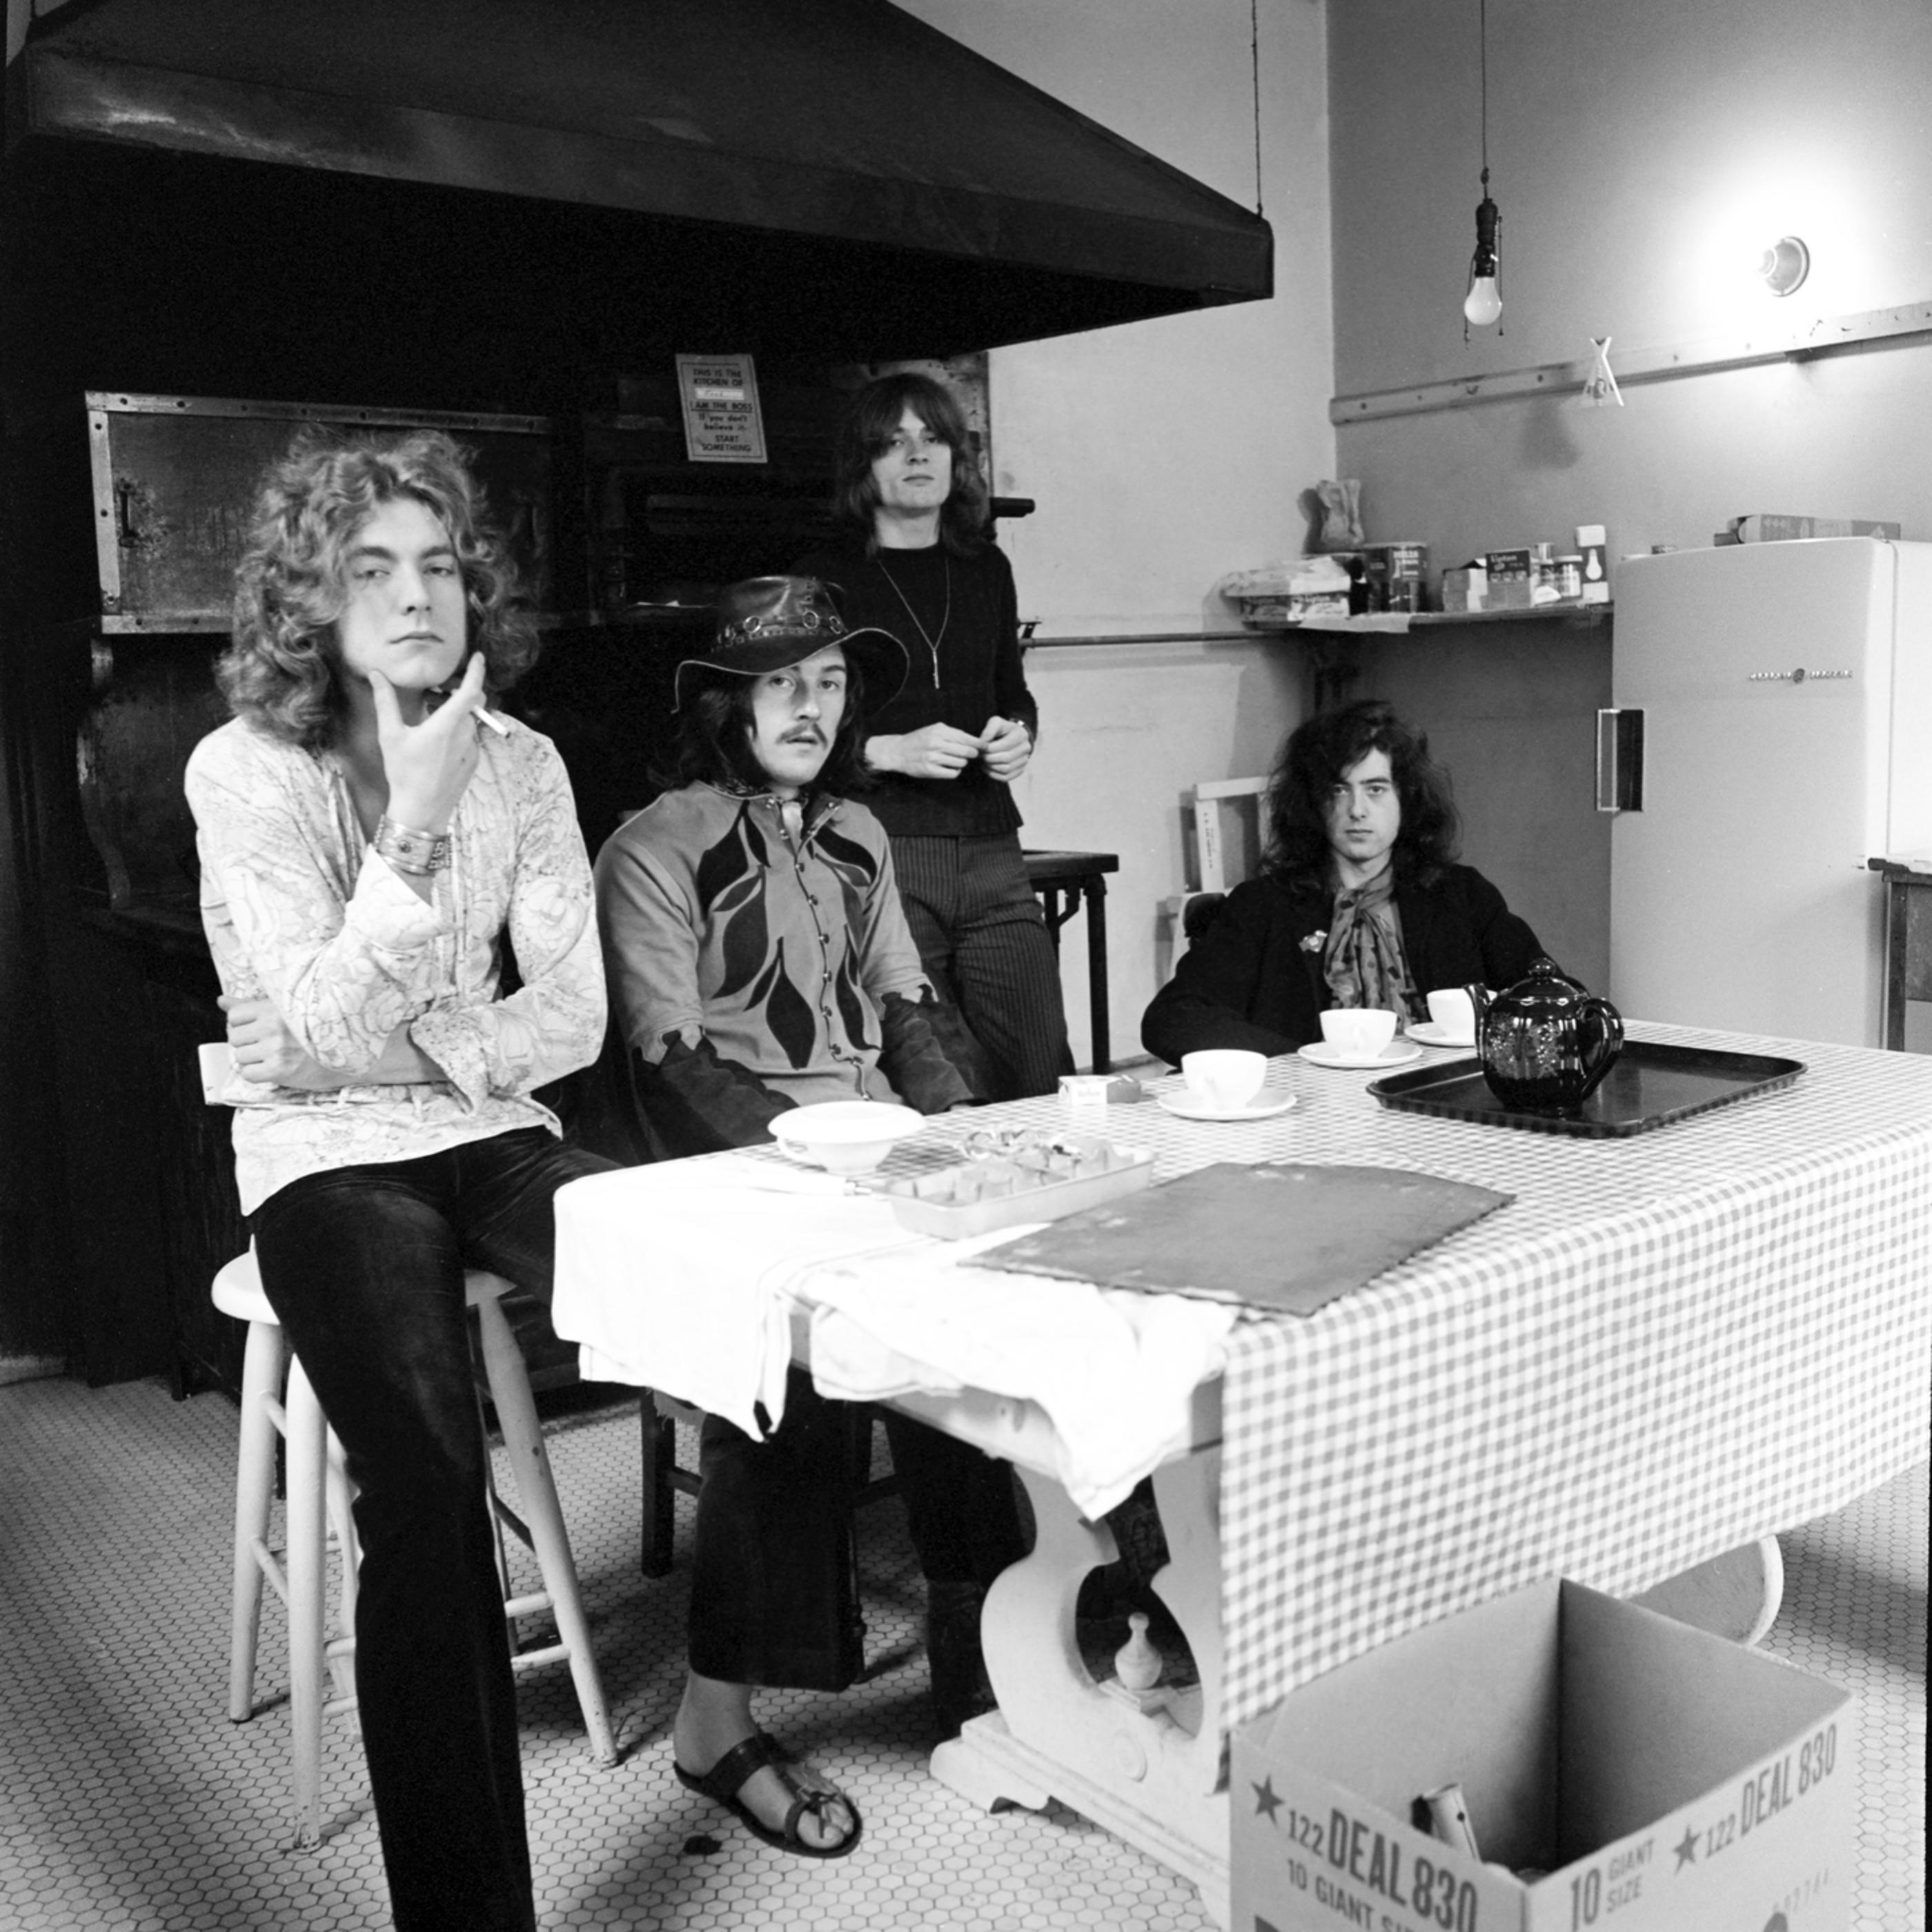 Led Zeppelin Sitting at a Kitchen Table 20" x 20" (Edition of 24) 